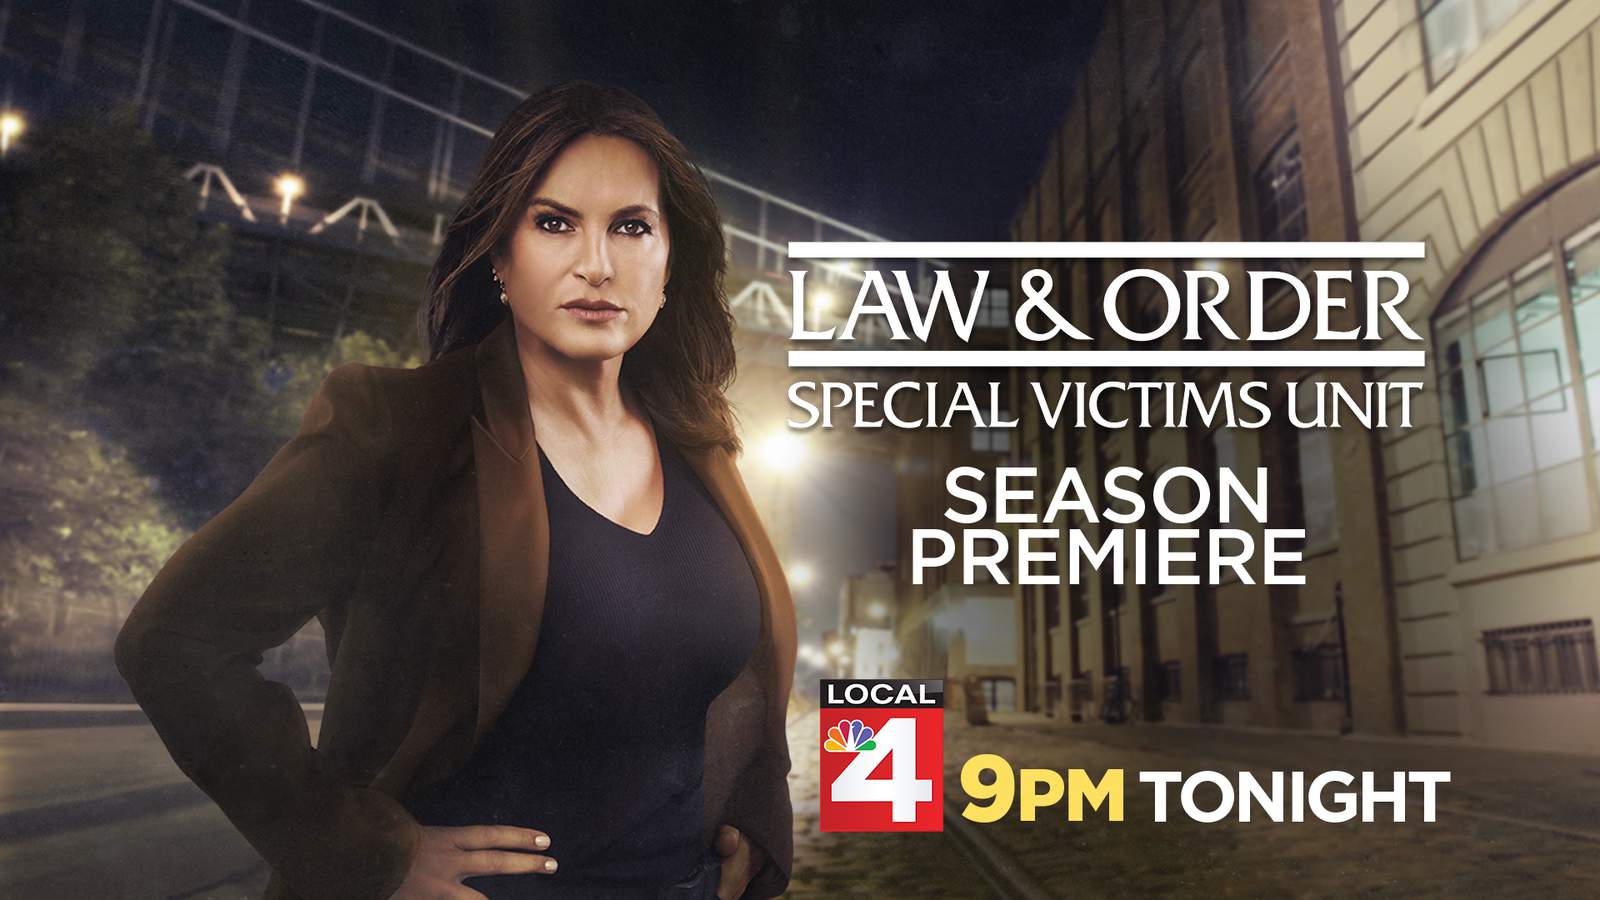 What to watch on Local 4 tonight